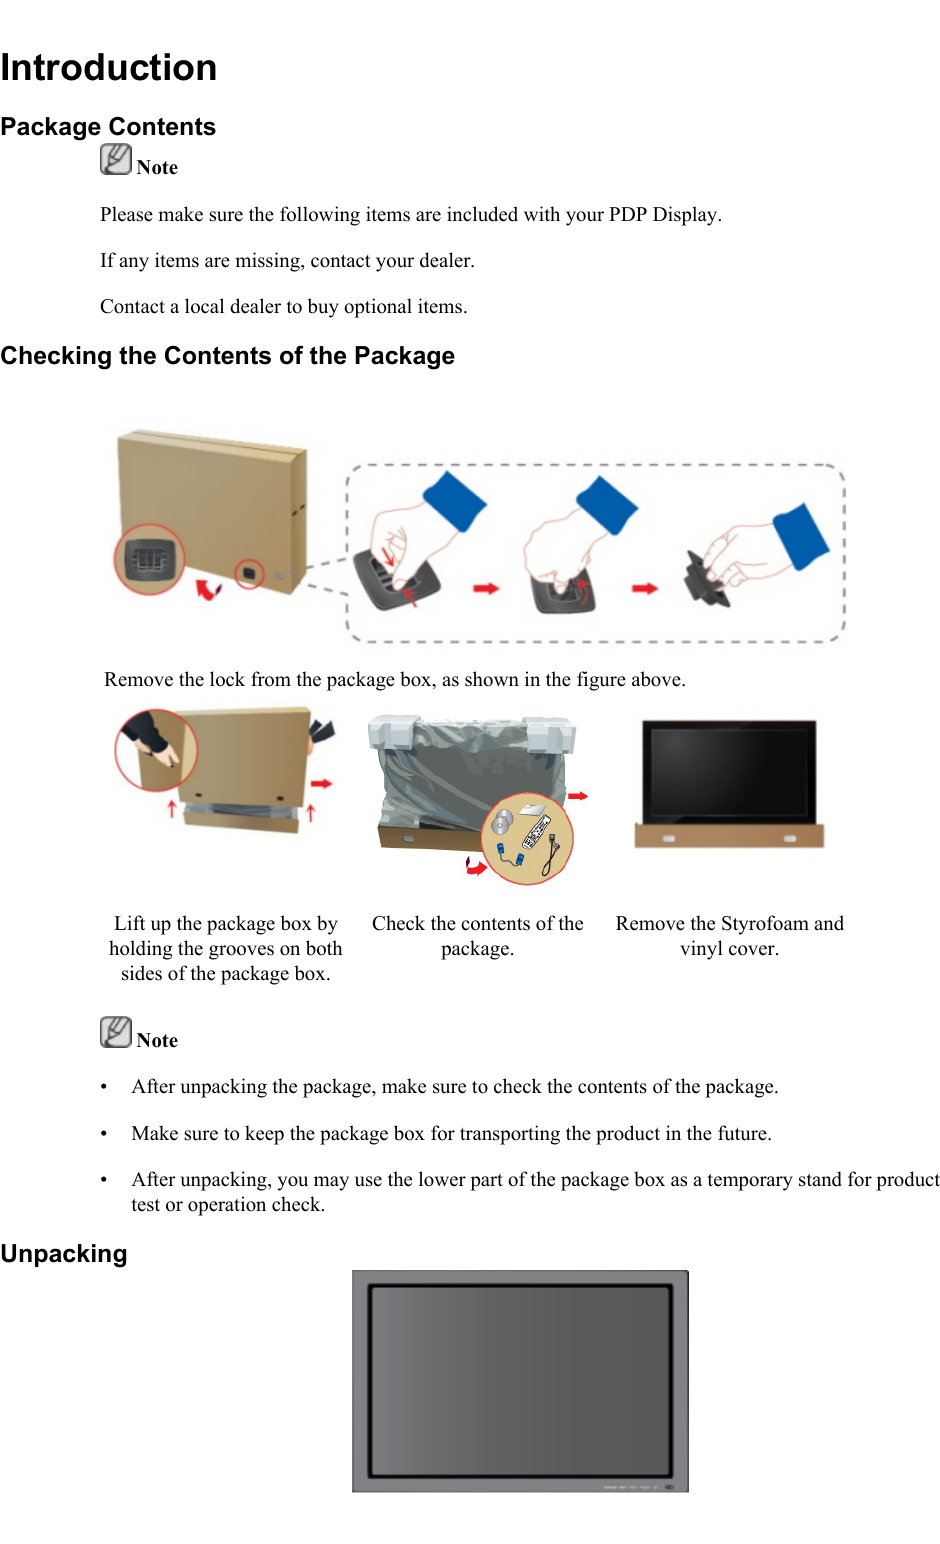 IntroductionPackage Contents NotePlease make sure the following items are included with your PDP Display.If any items are missing, contact your dealer.Contact a local dealer to buy optional items.Checking the Contents of the PackageRemove the lock from the package box, as shown in the figure above.Lift up the package box byholding the grooves on bothsides of the package box.Check the contents of thepackage.Remove the Styrofoam andvinyl cover. Note• After unpacking the package, make sure to check the contents of the package.• Make sure to keep the package box for transporting the product in the future.• After unpacking, you may use the lower part of the package box as a temporary stand for producttest or operation check.Unpacking